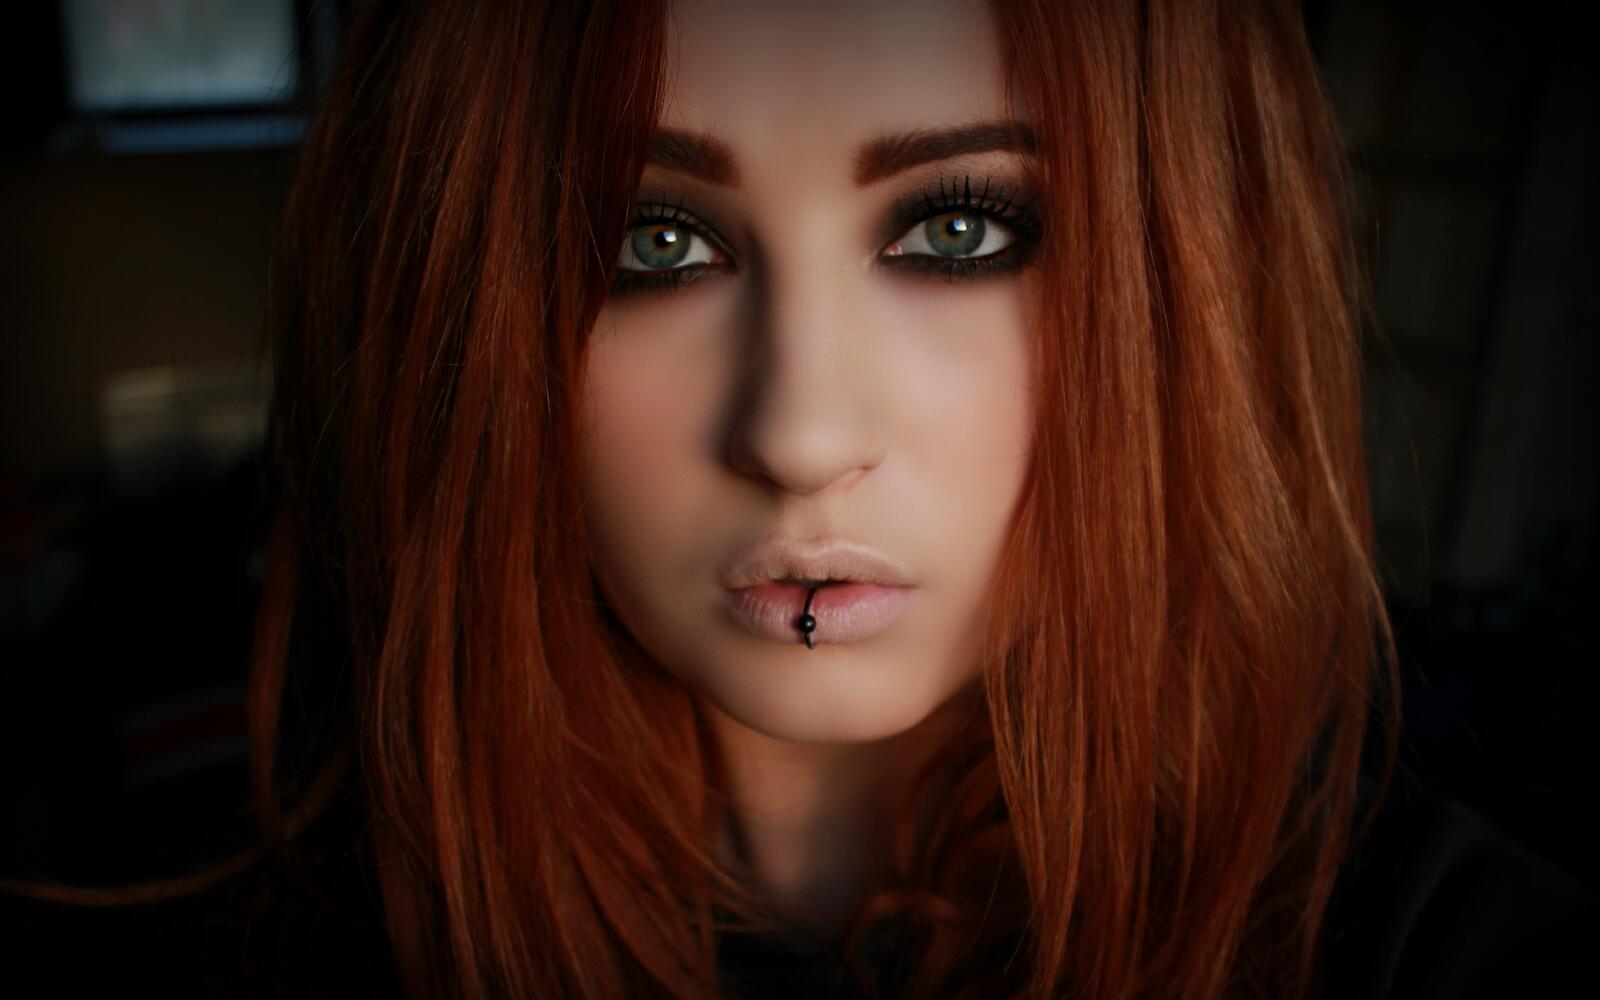 Wallpapers face redhead model on the desktop